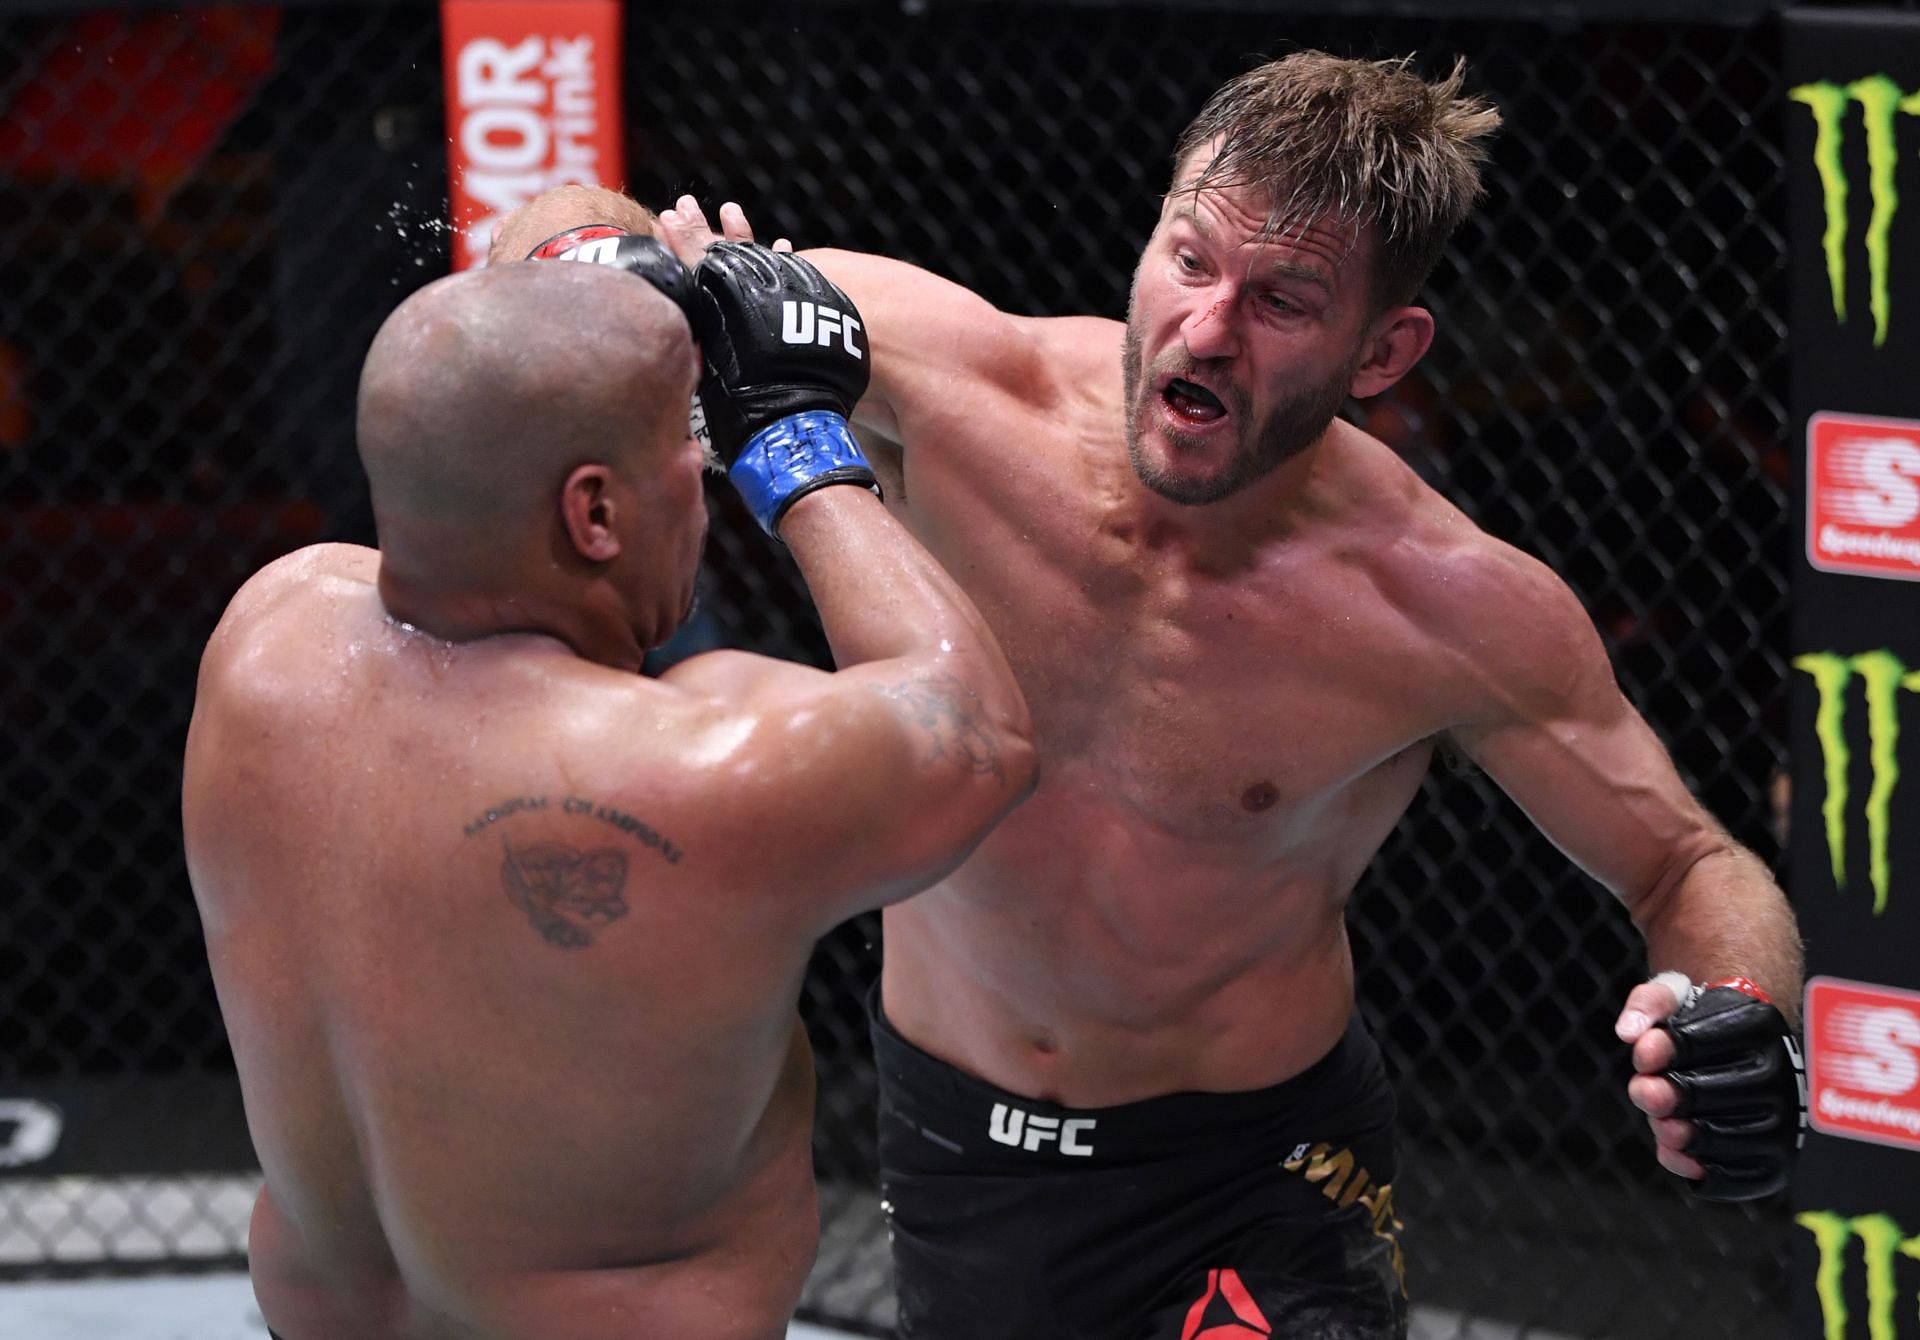 Stipe Miocic remains the most accomplished heavyweight in UFC history